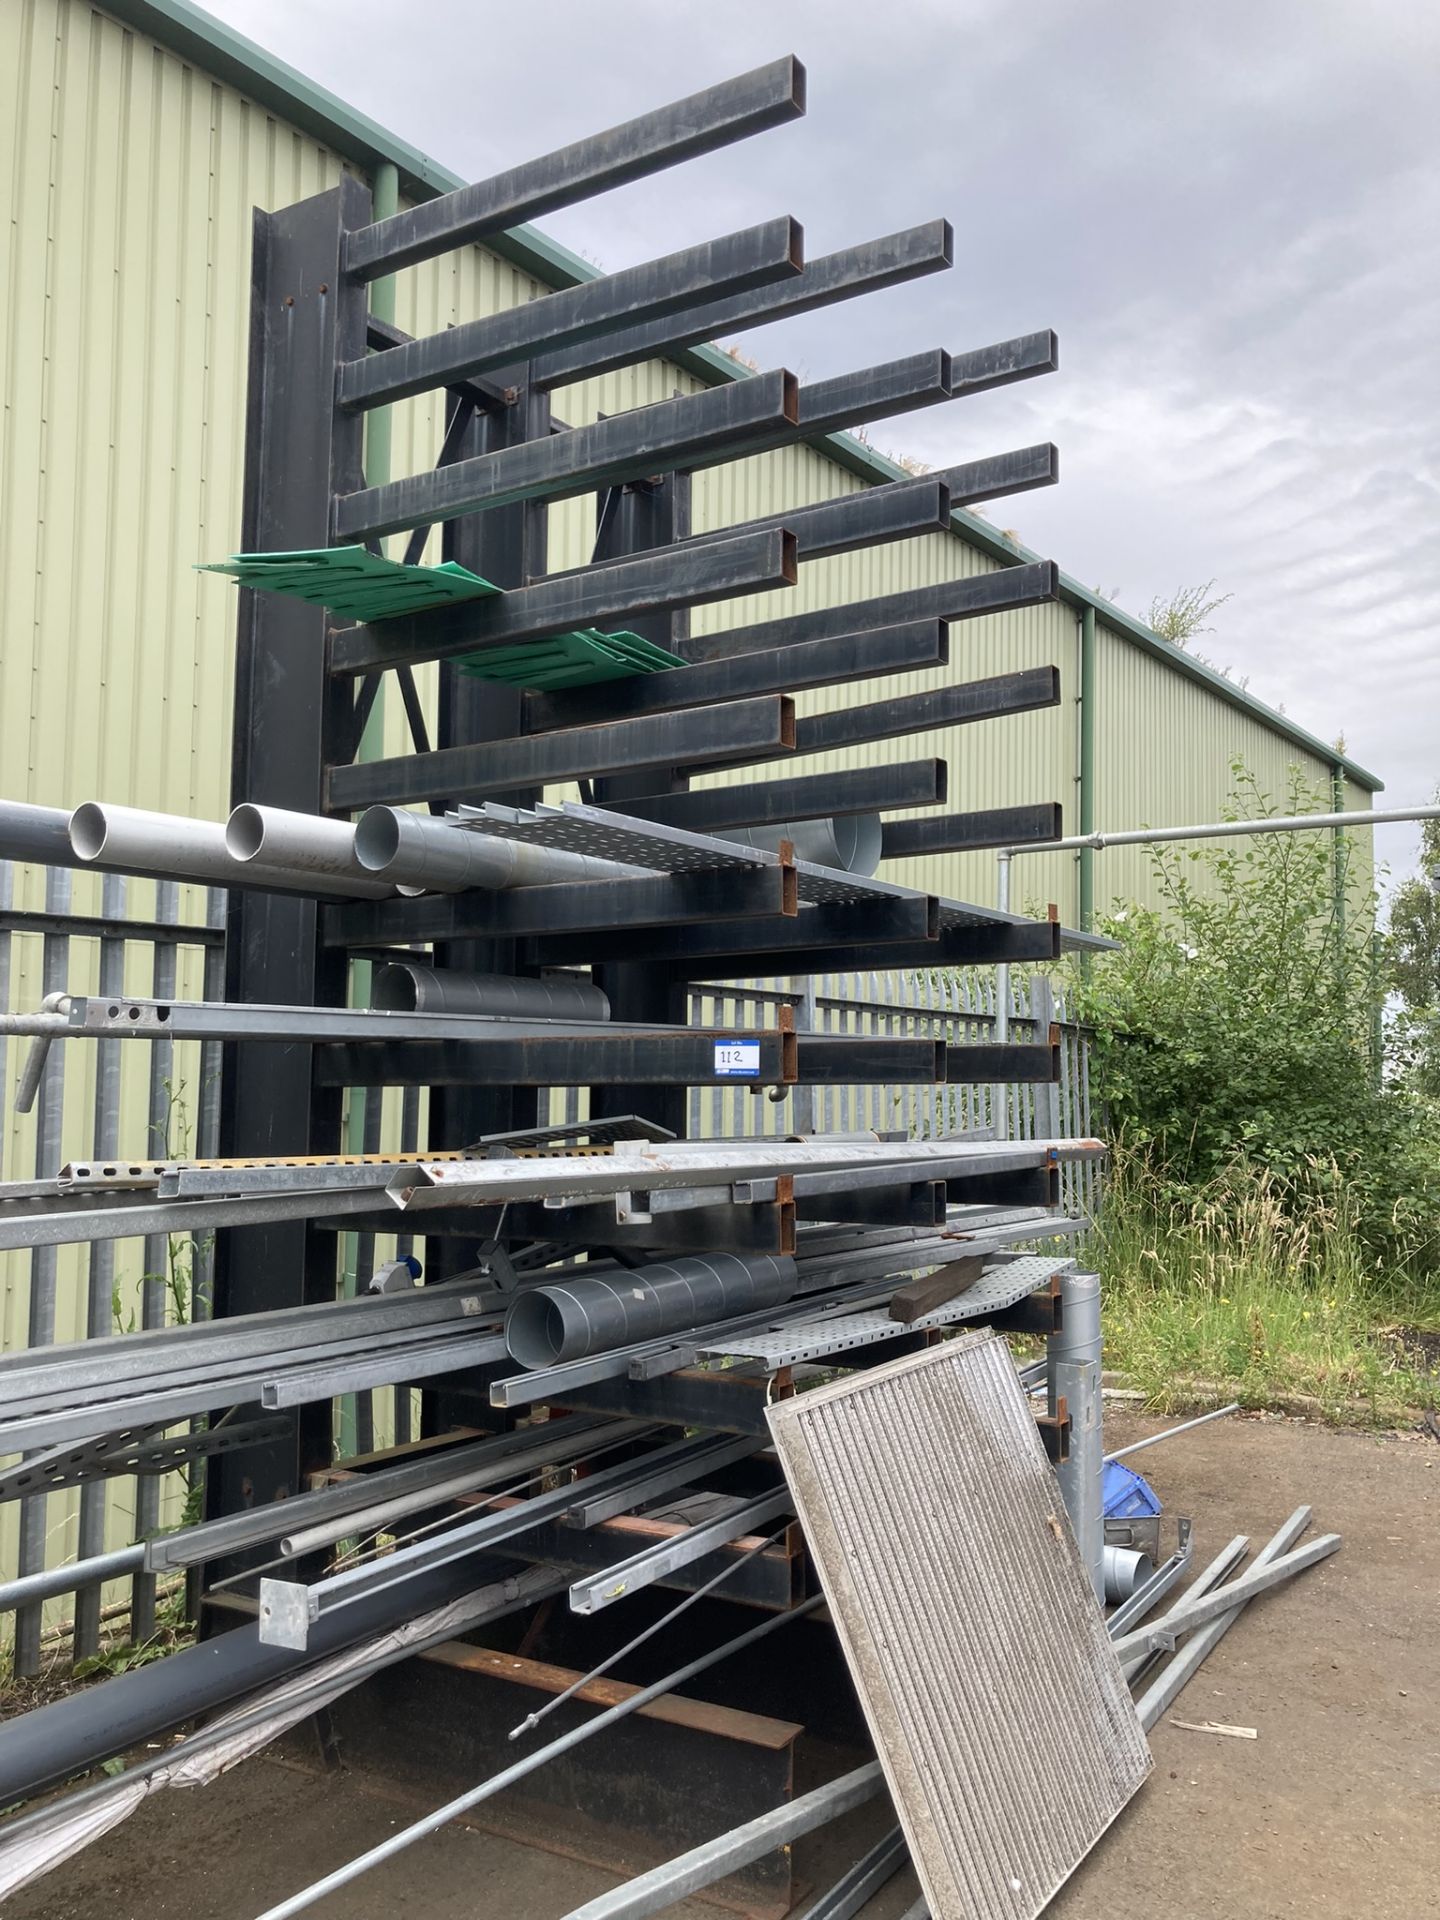 Cantilever Steel Storage Rack, 11 Tier, 1000kg Rated Capacity Each Tier (Contents not Included)